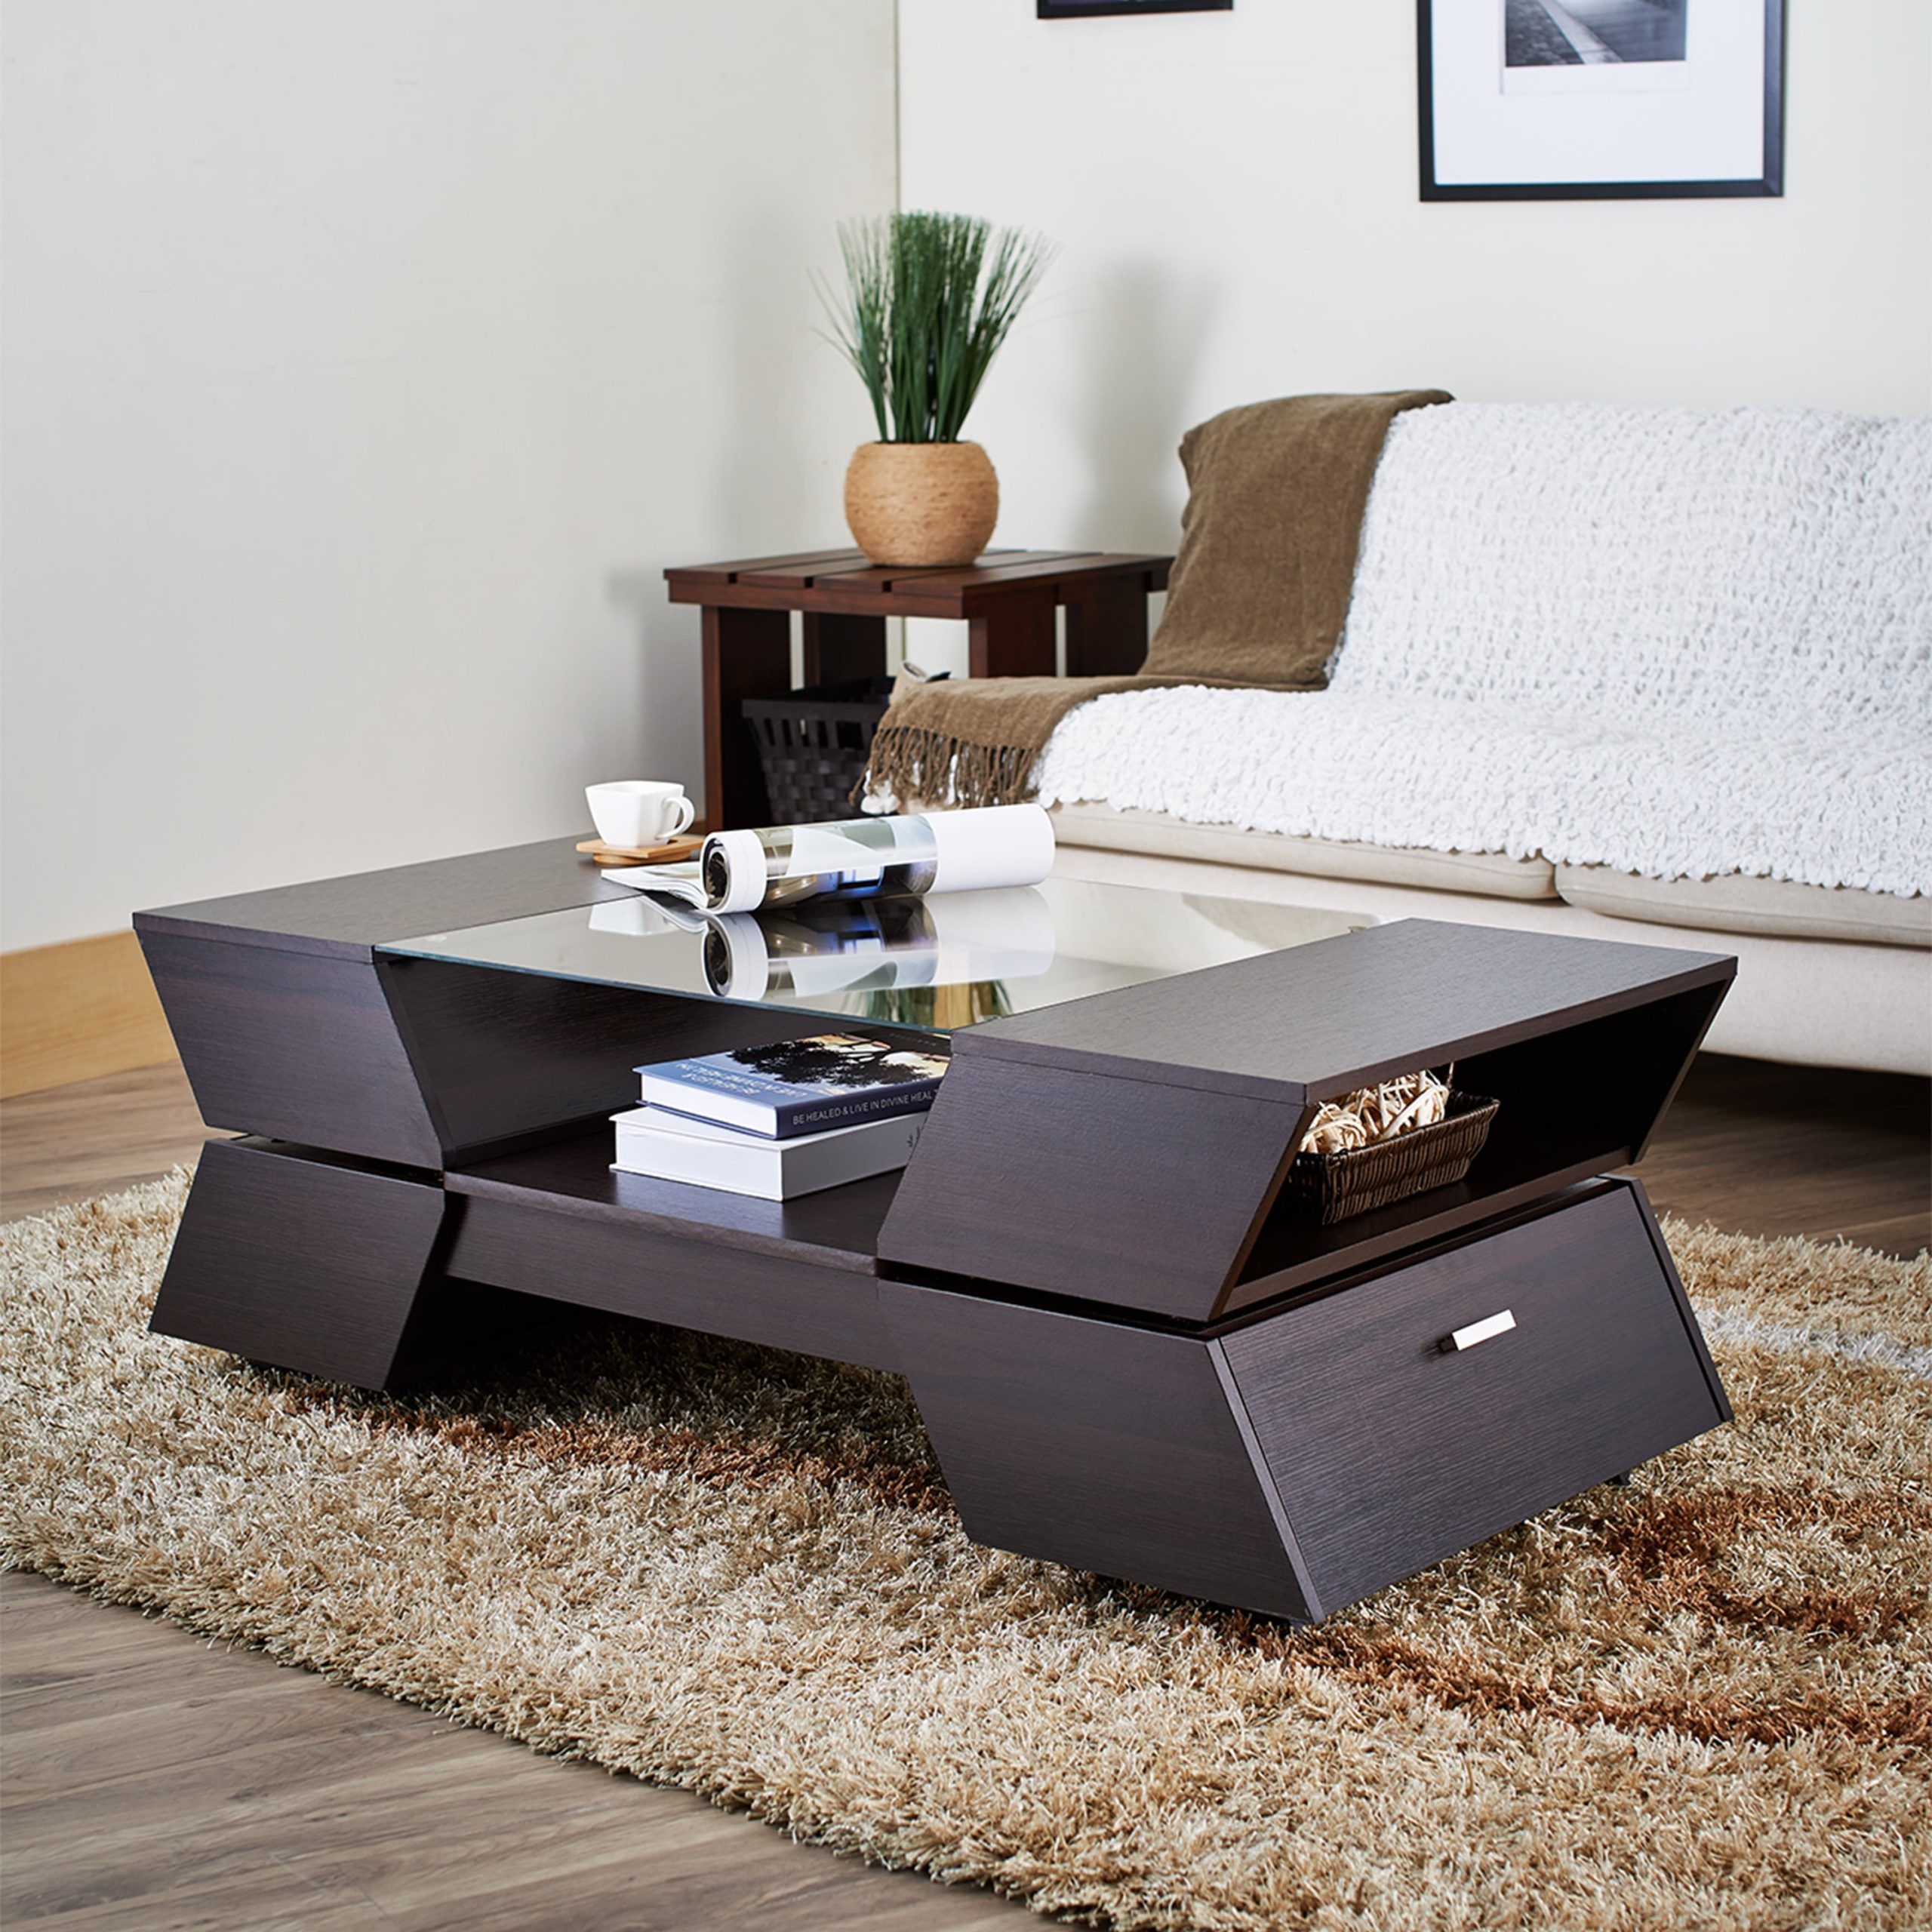 Espresso Coffee Table With Glass Top : Elke Rectangular Glass Coffee Pertaining To Glass Top Coffee Tables (View 4 of 15)